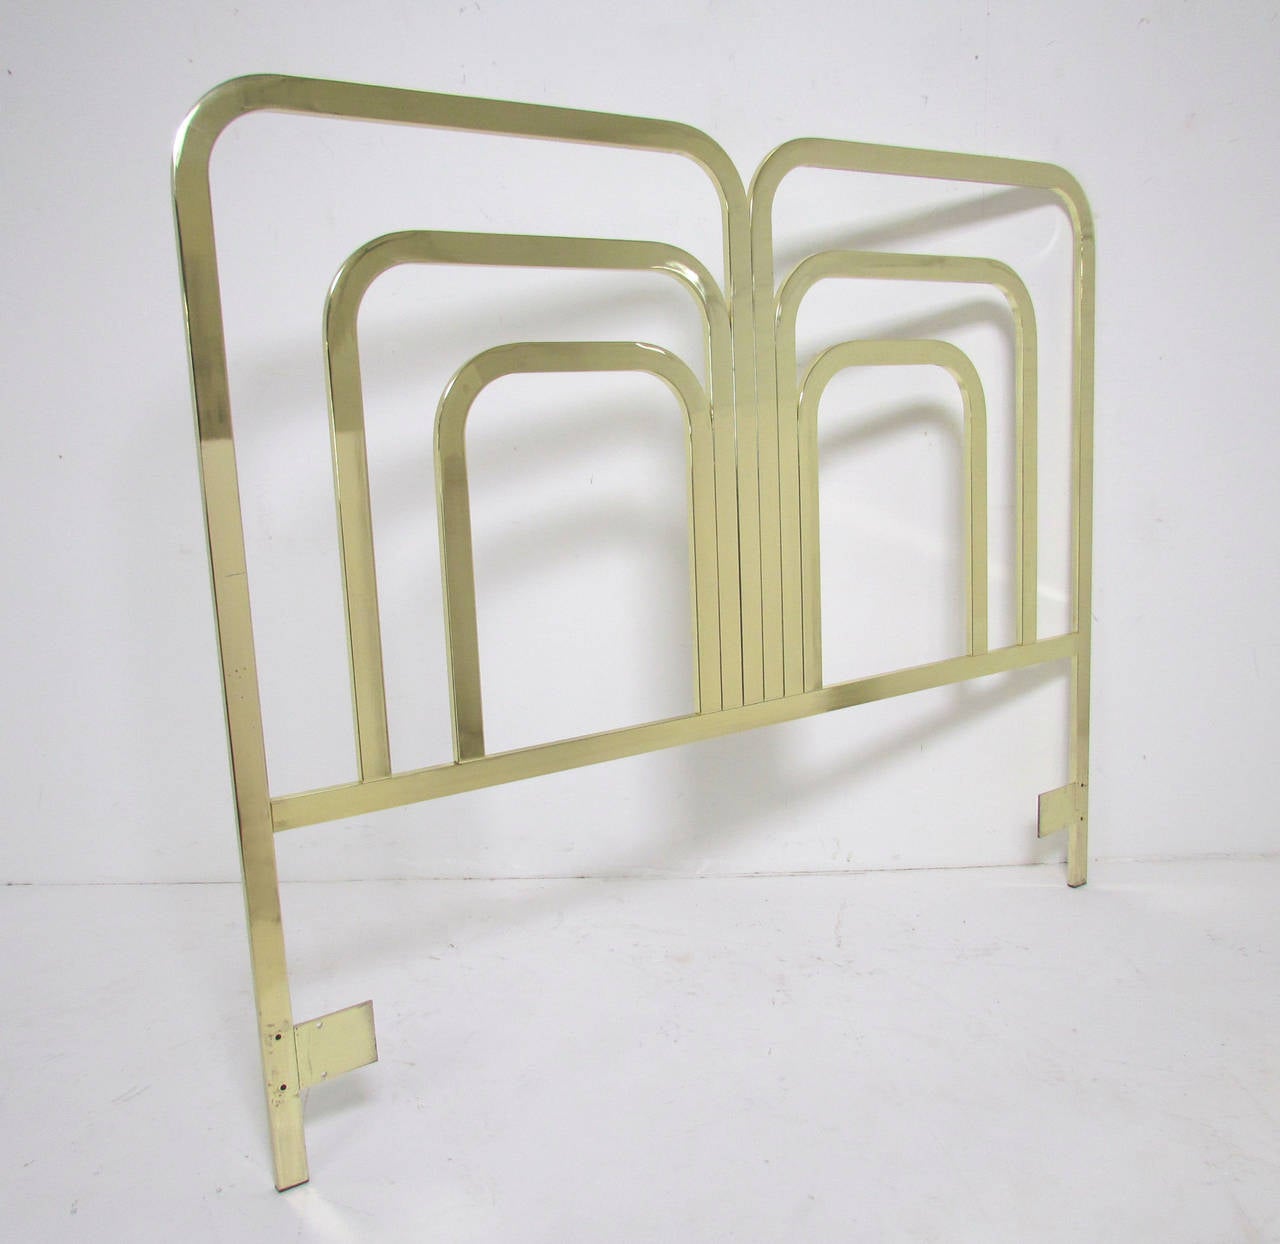 Stunning Art Deco revival style headboard for a queen size bed, in mirror polished brass. Attributed to Milo Baughman, signed DIA (Design Institute America).